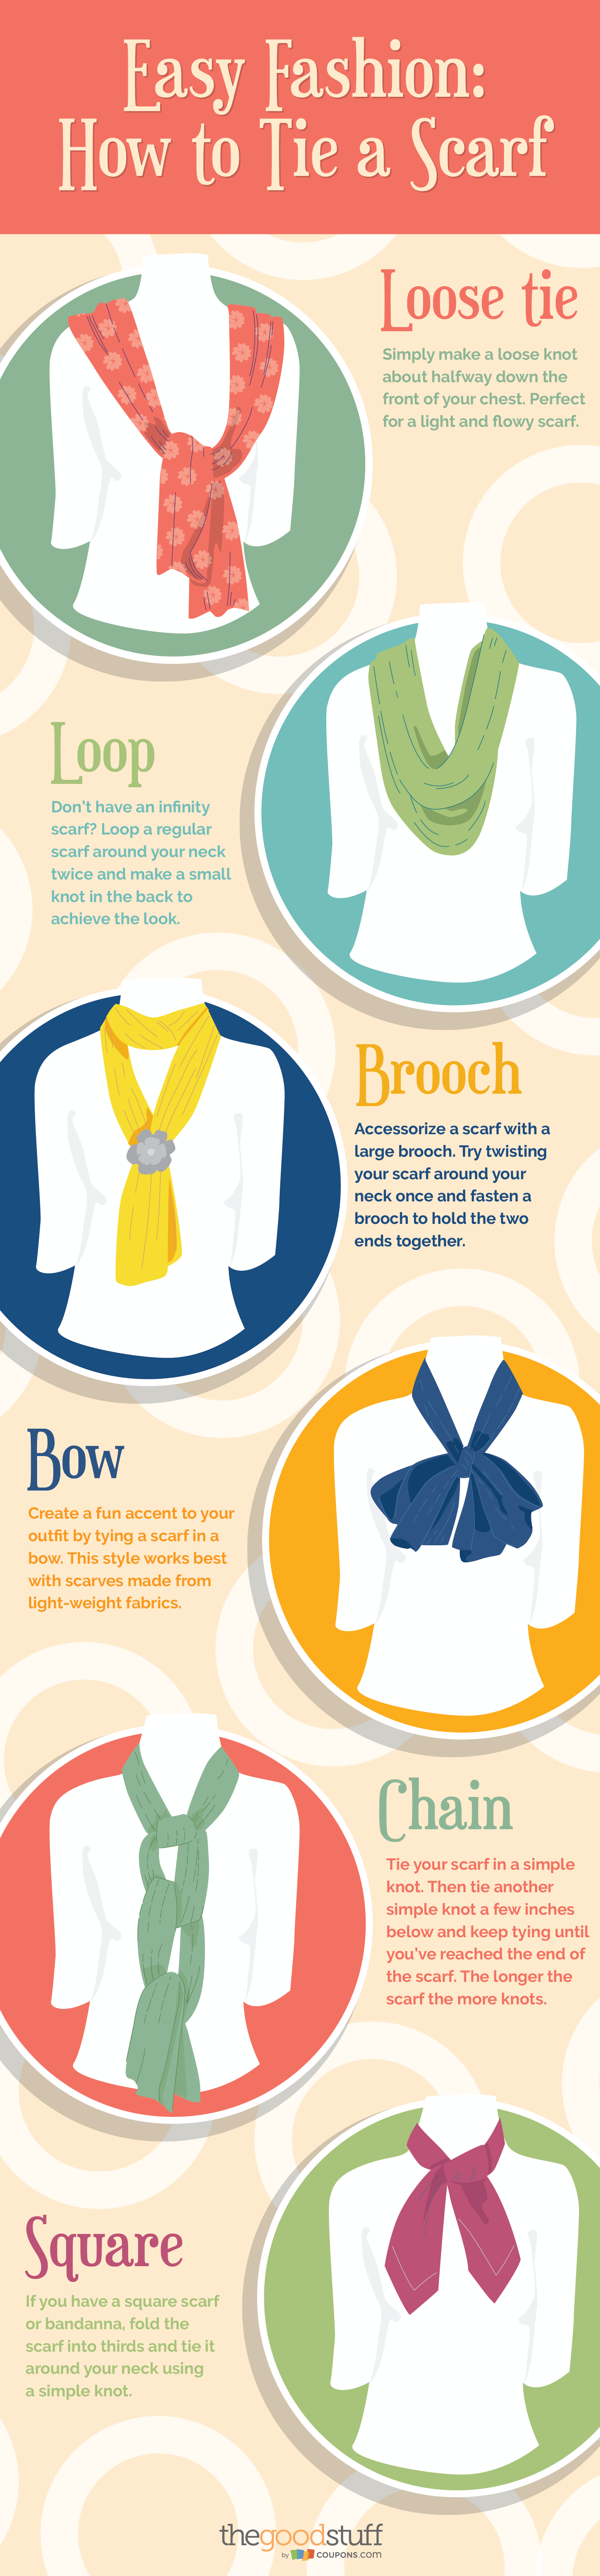 How To Tie A Scarf Infographic